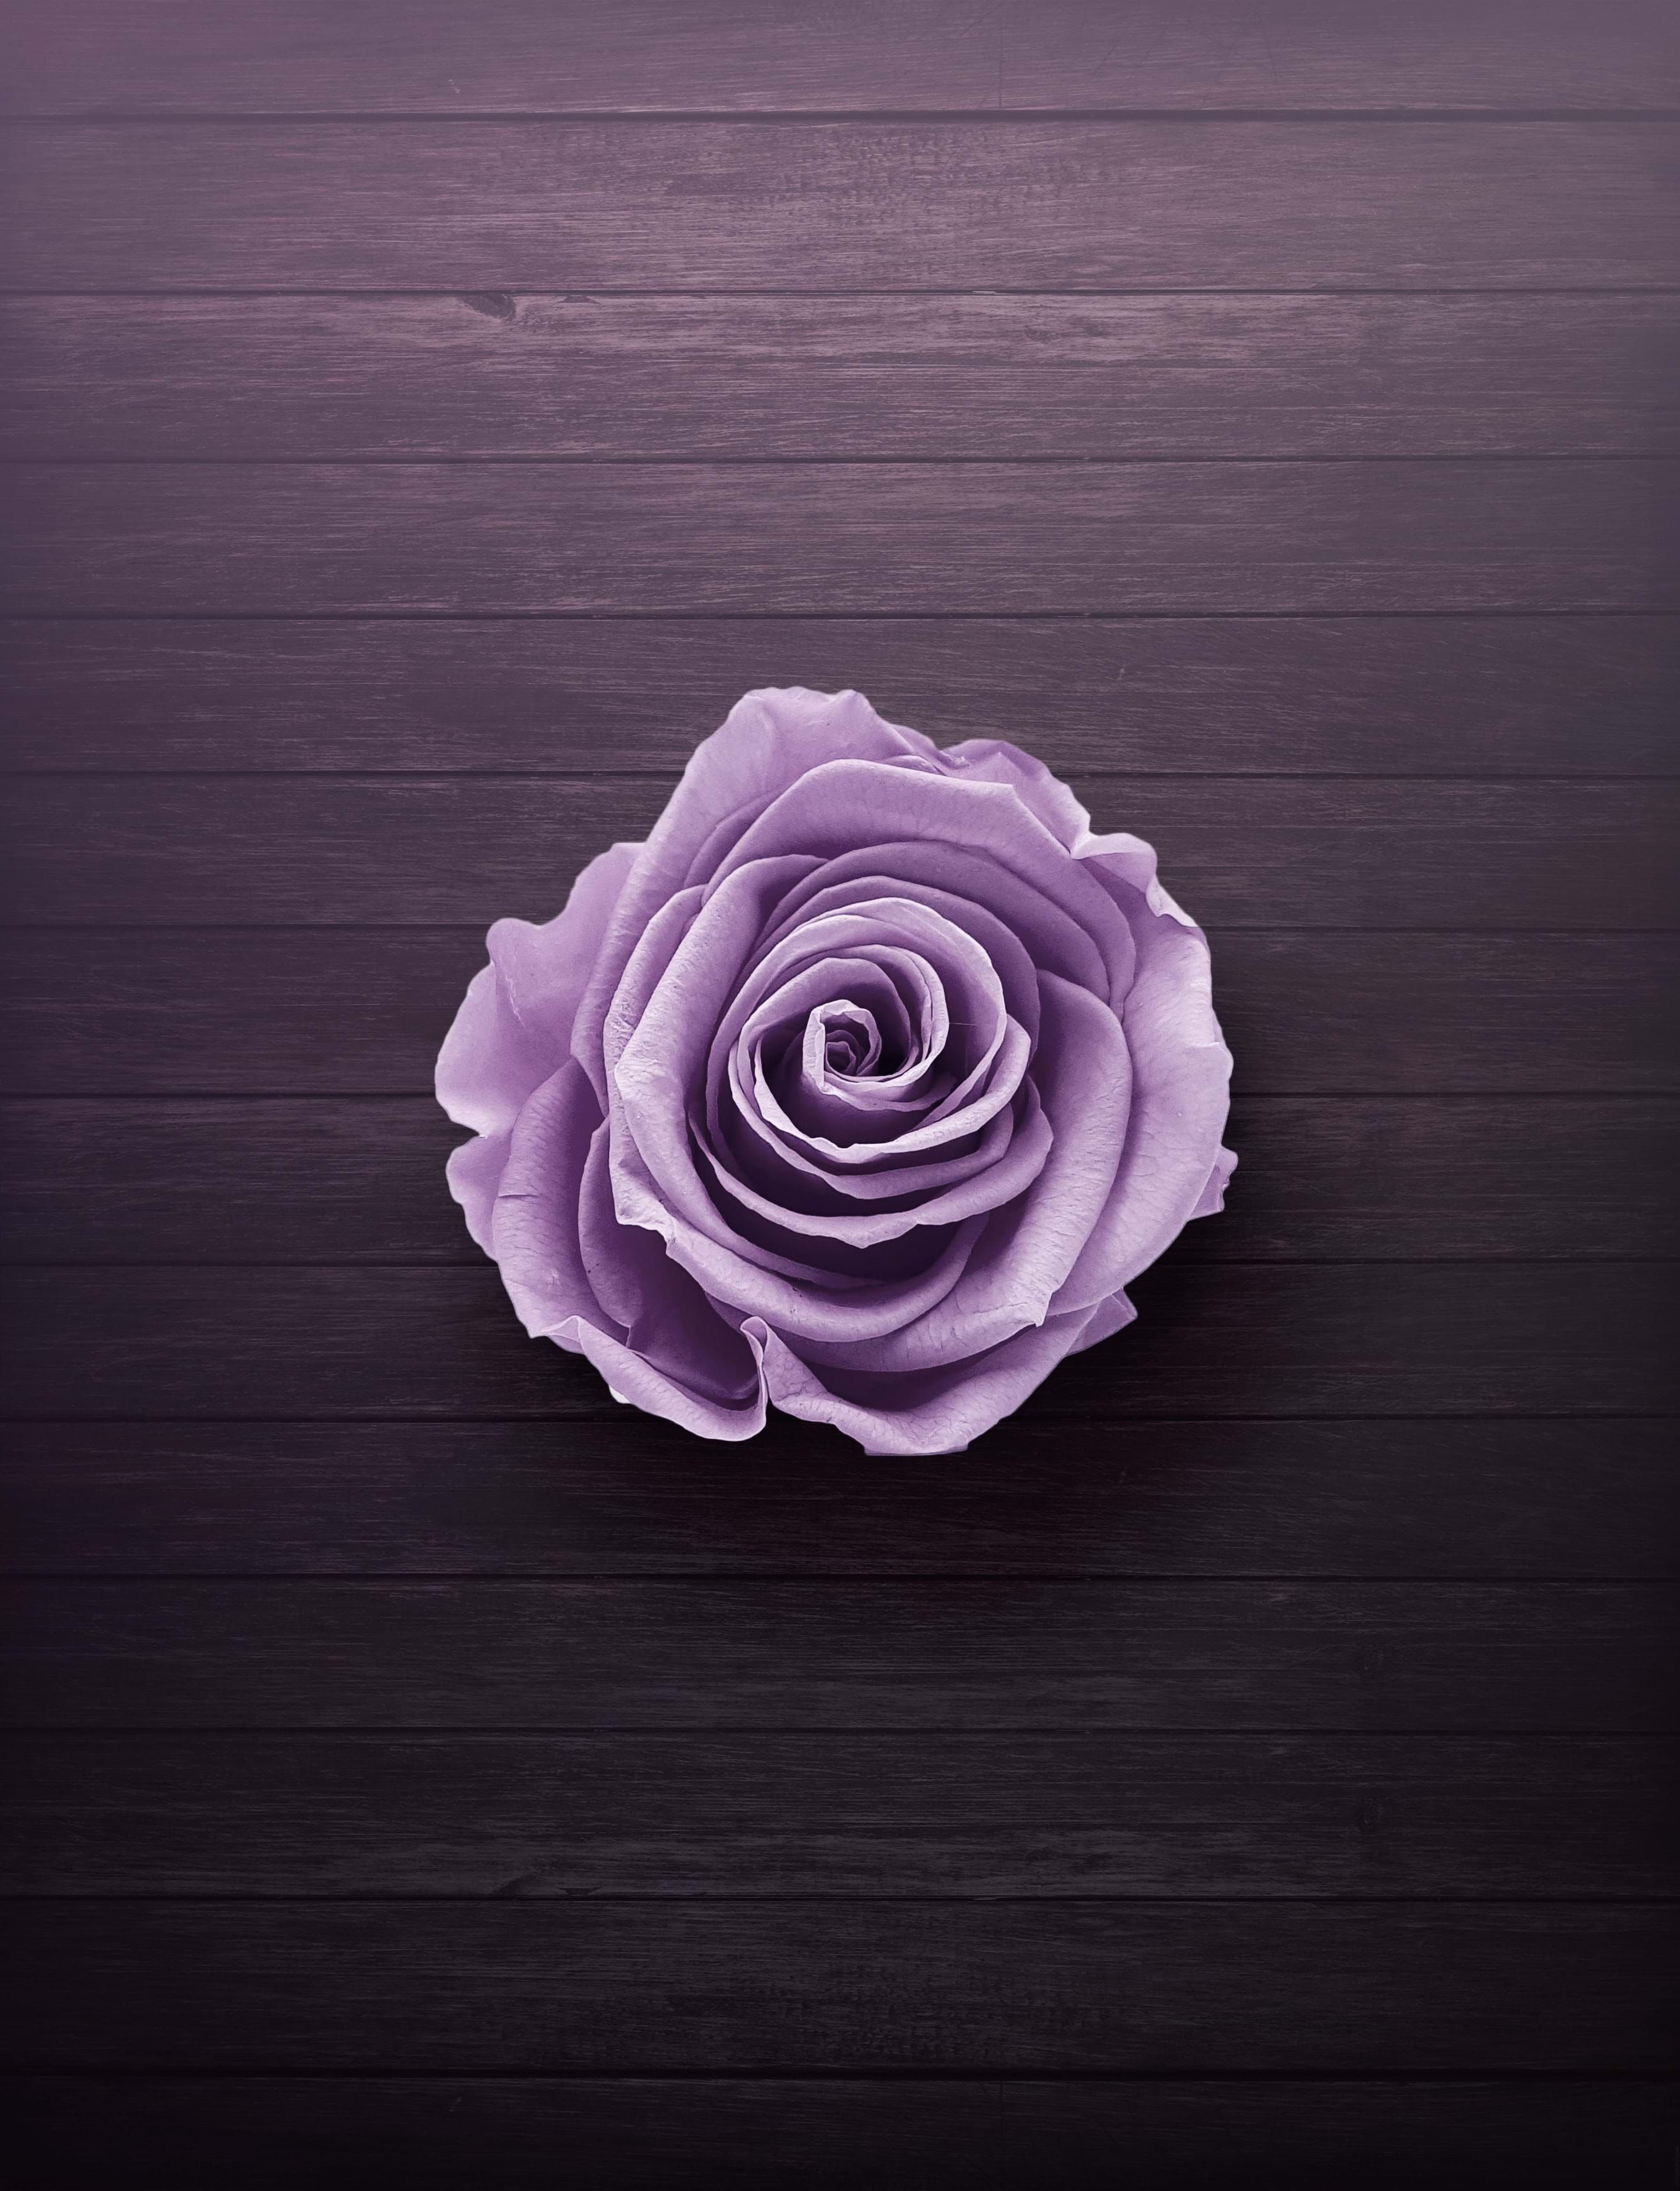 A light purple rose sat on a wooden background